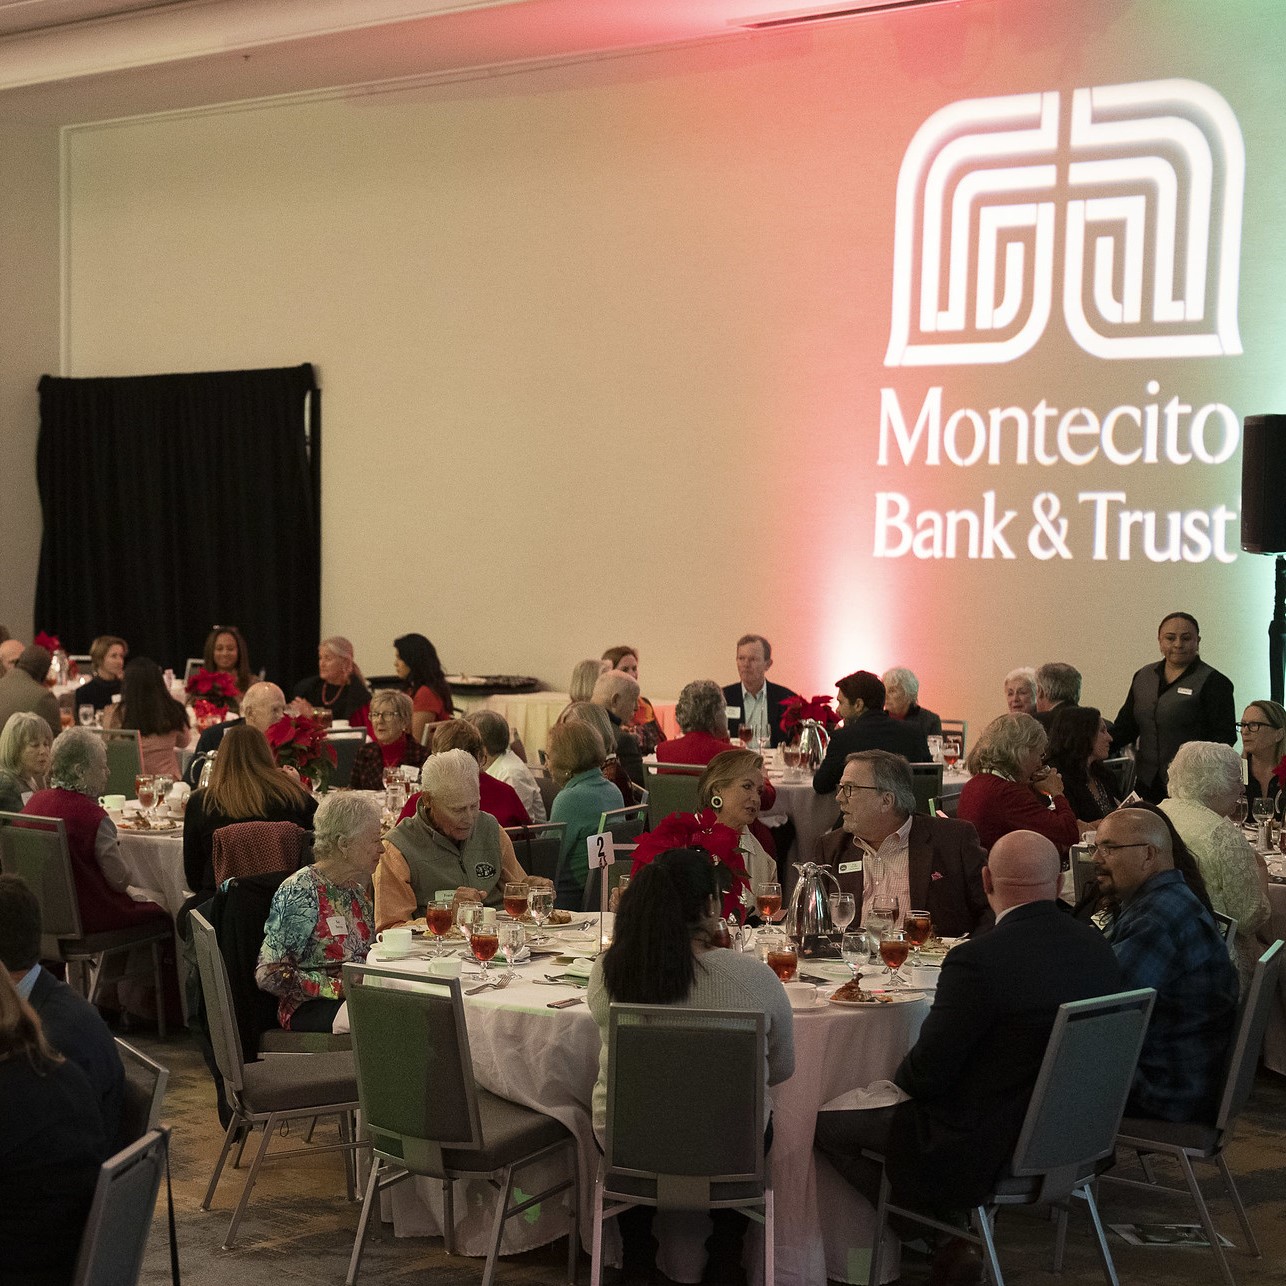 CLL 2022 Attendees dining with Montecito Bank & Trust logo projected on the wall.